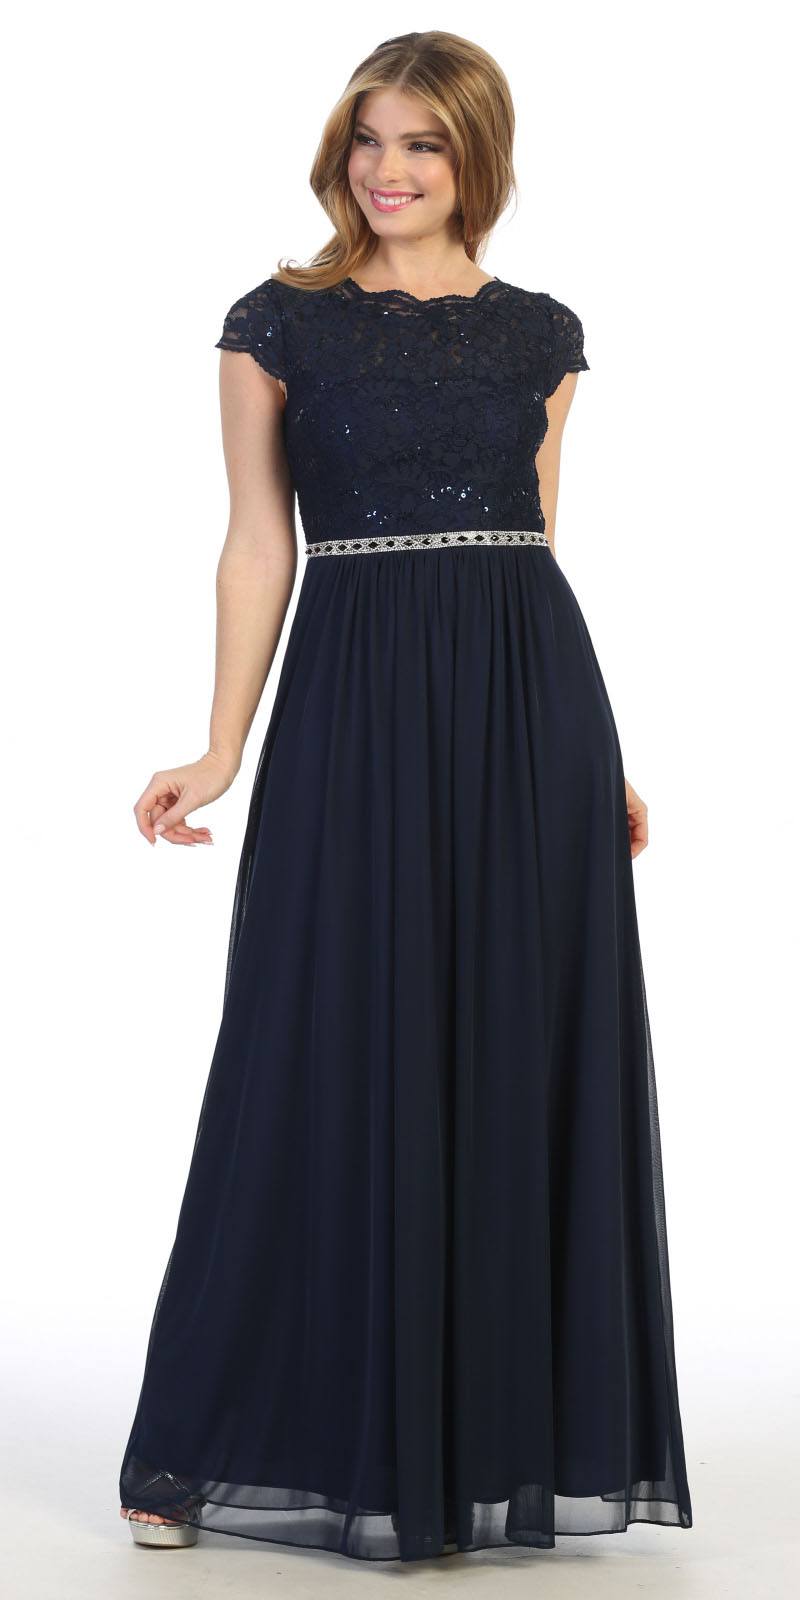 Navy Blue A-Line Long Formal Dress with Short Sleeves